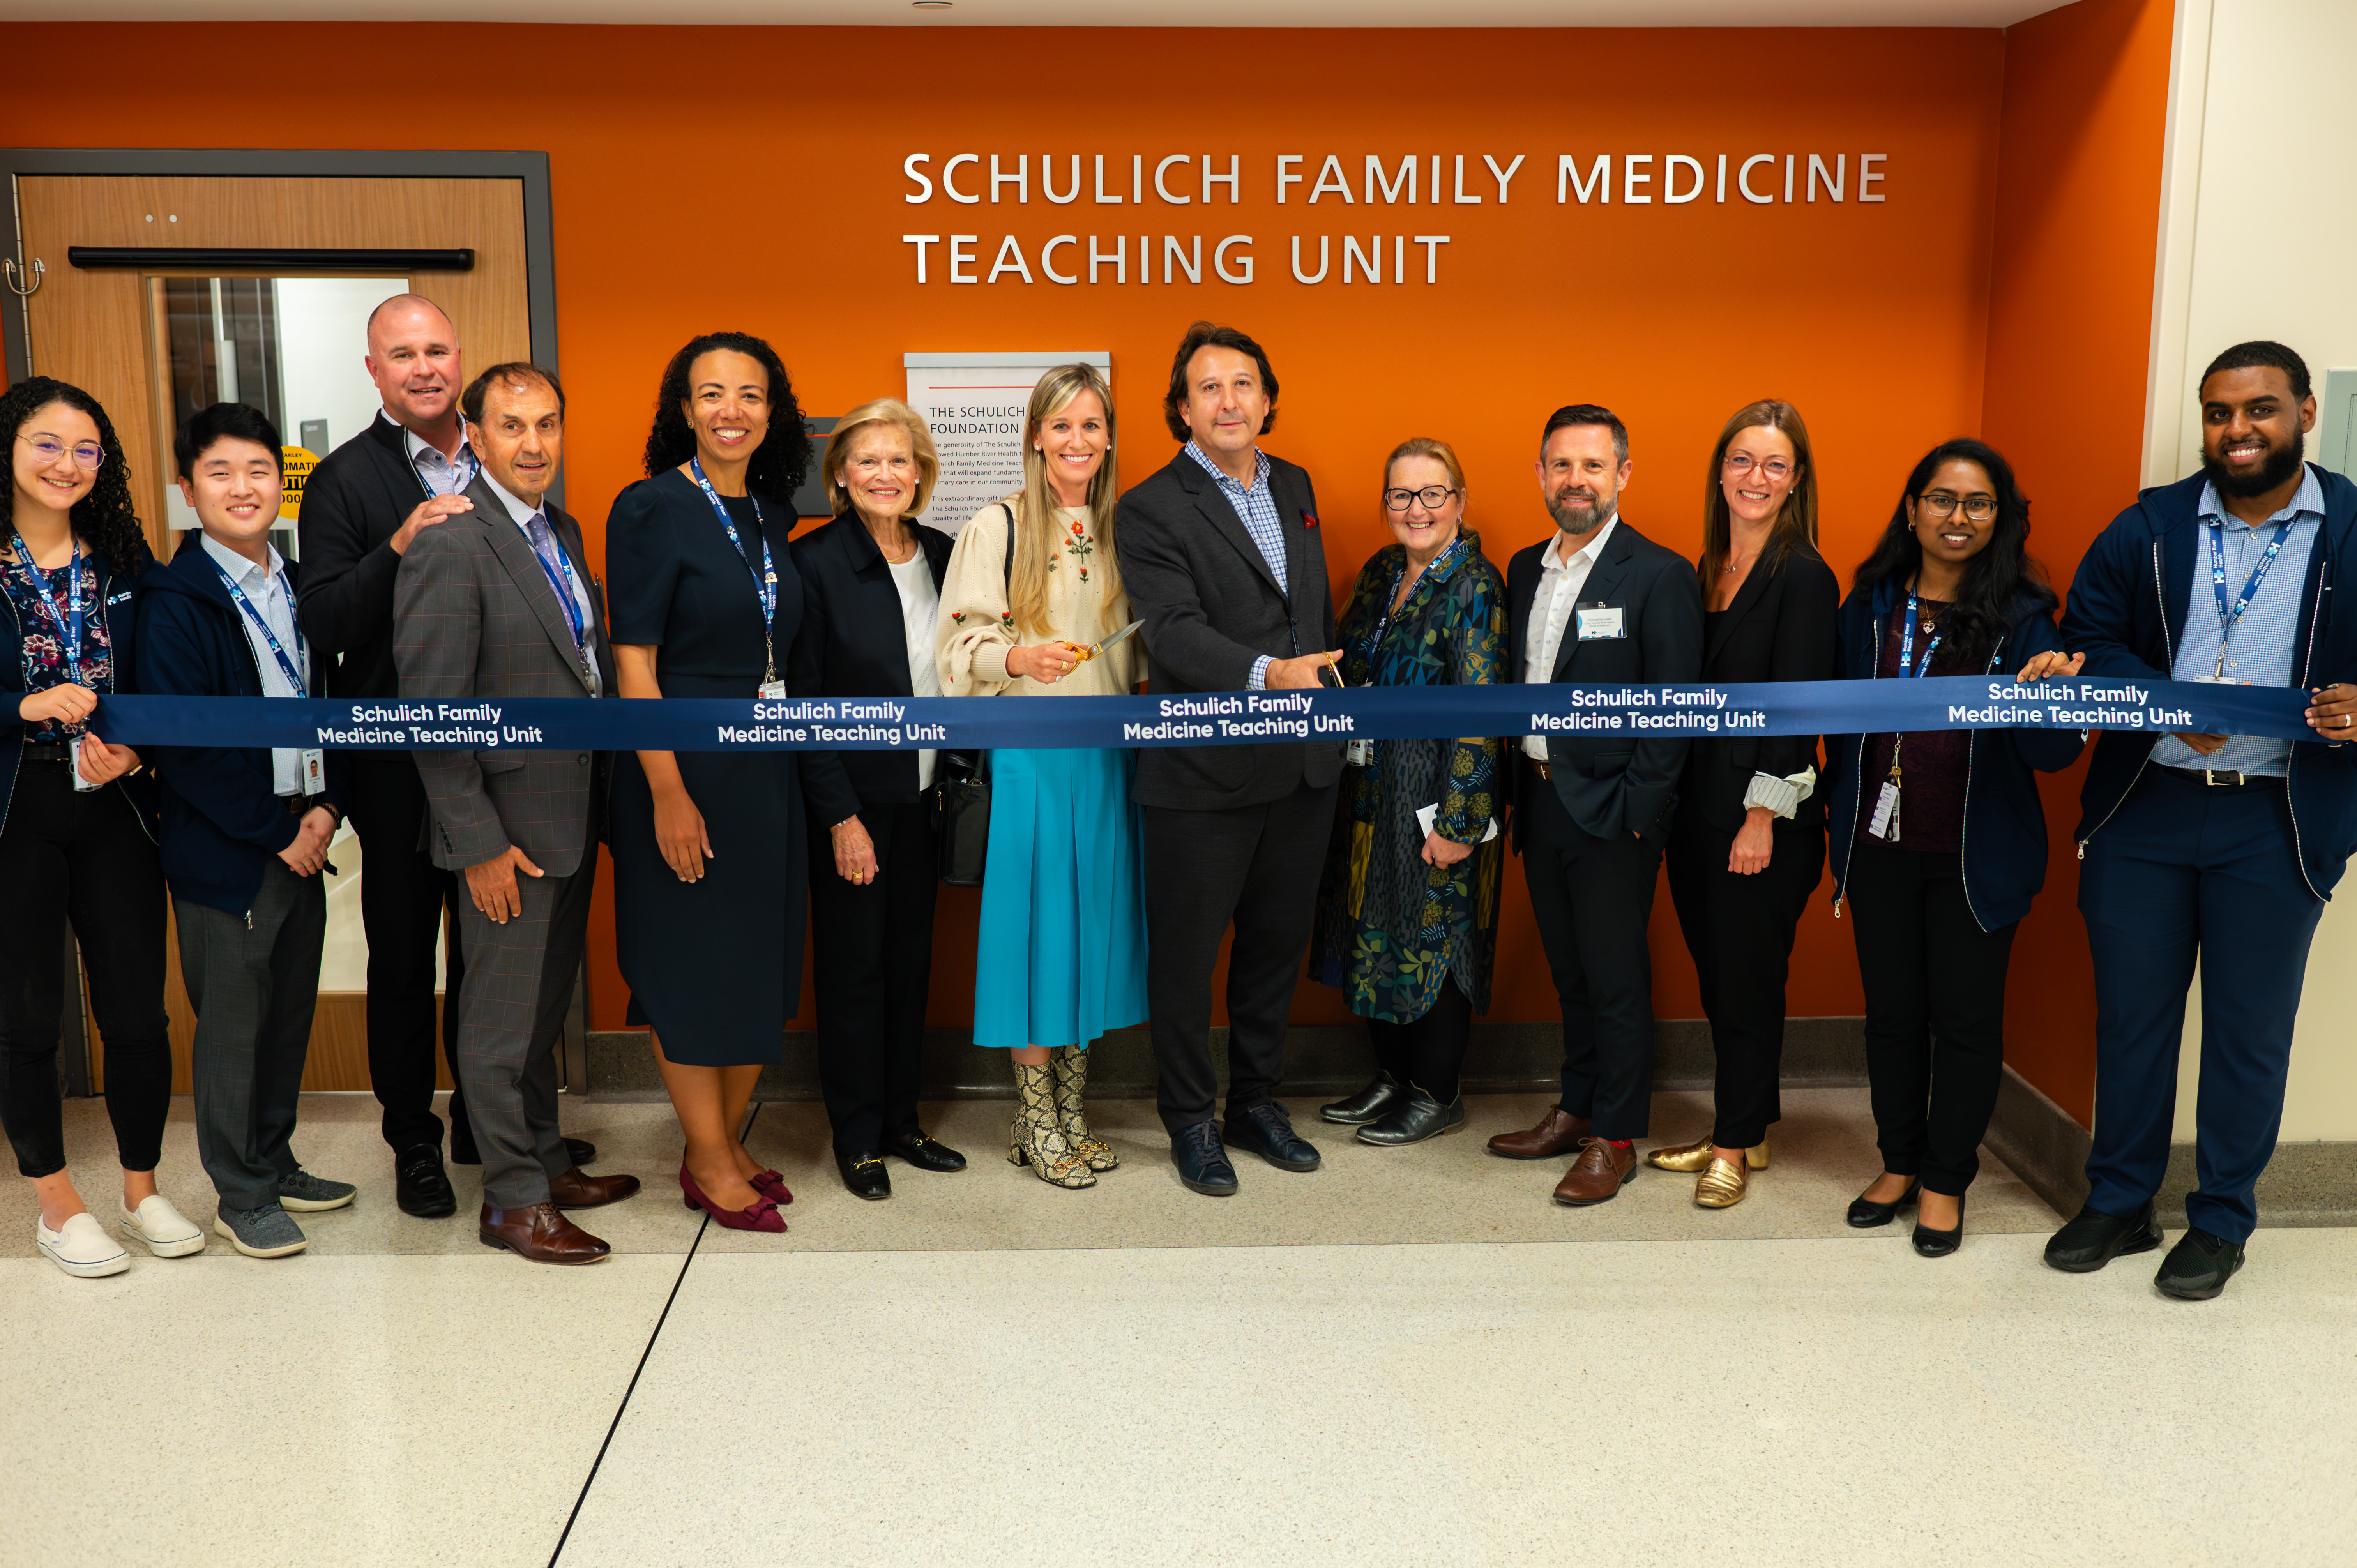 Grand Opening of the Schulich Family Medicine Teaching Unit 